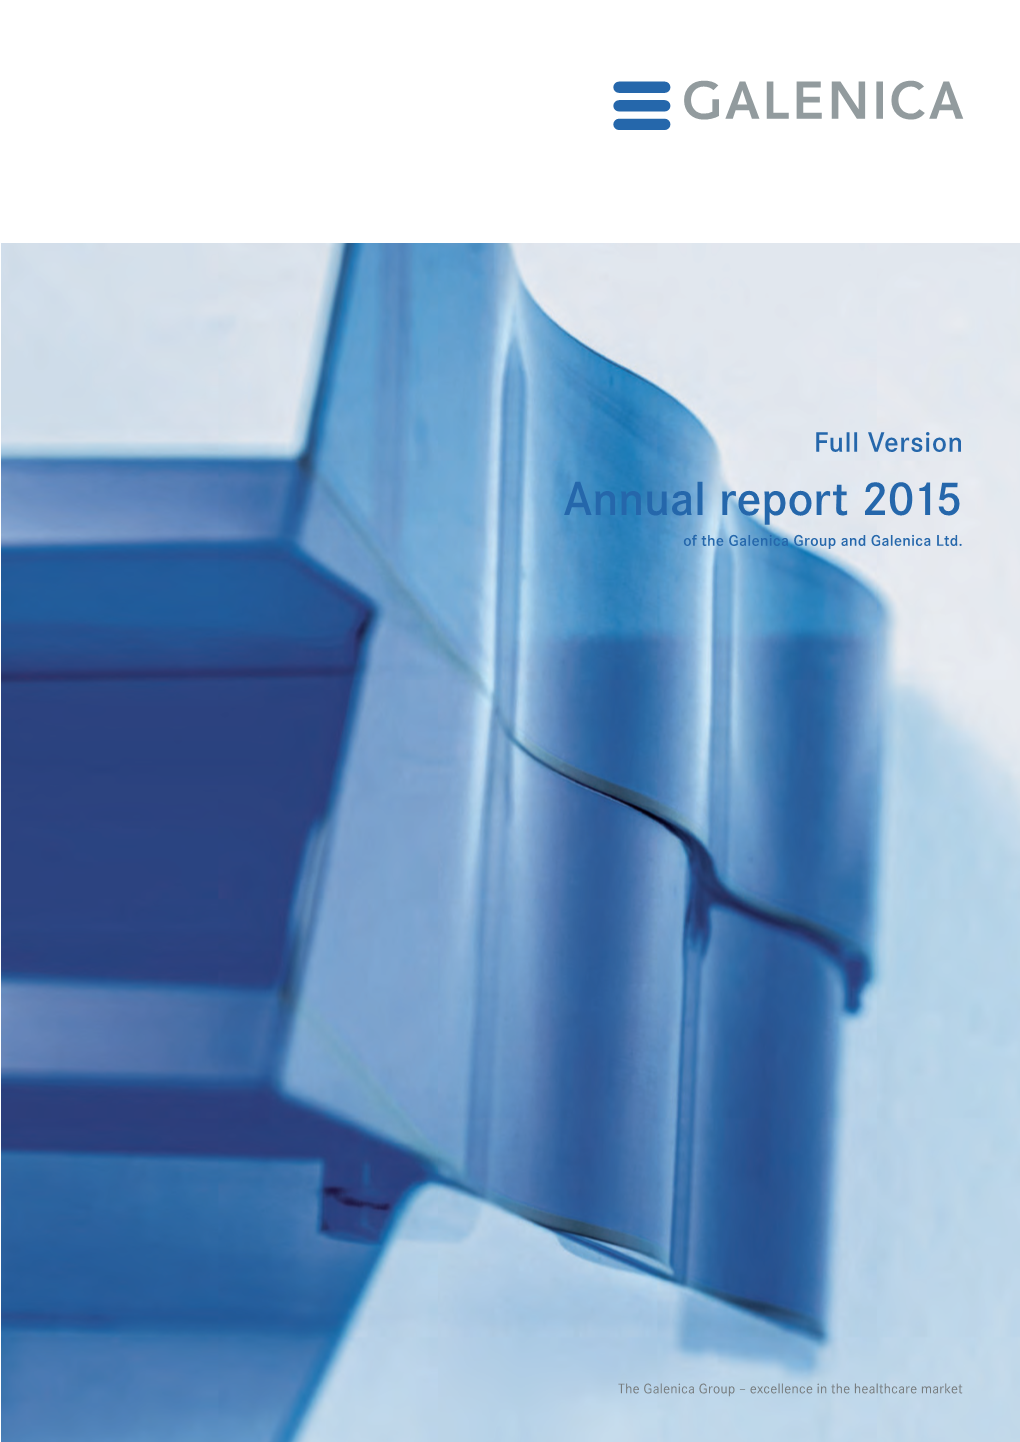 Annual Report 2015 of the Galenica Group and Galenica Ltd